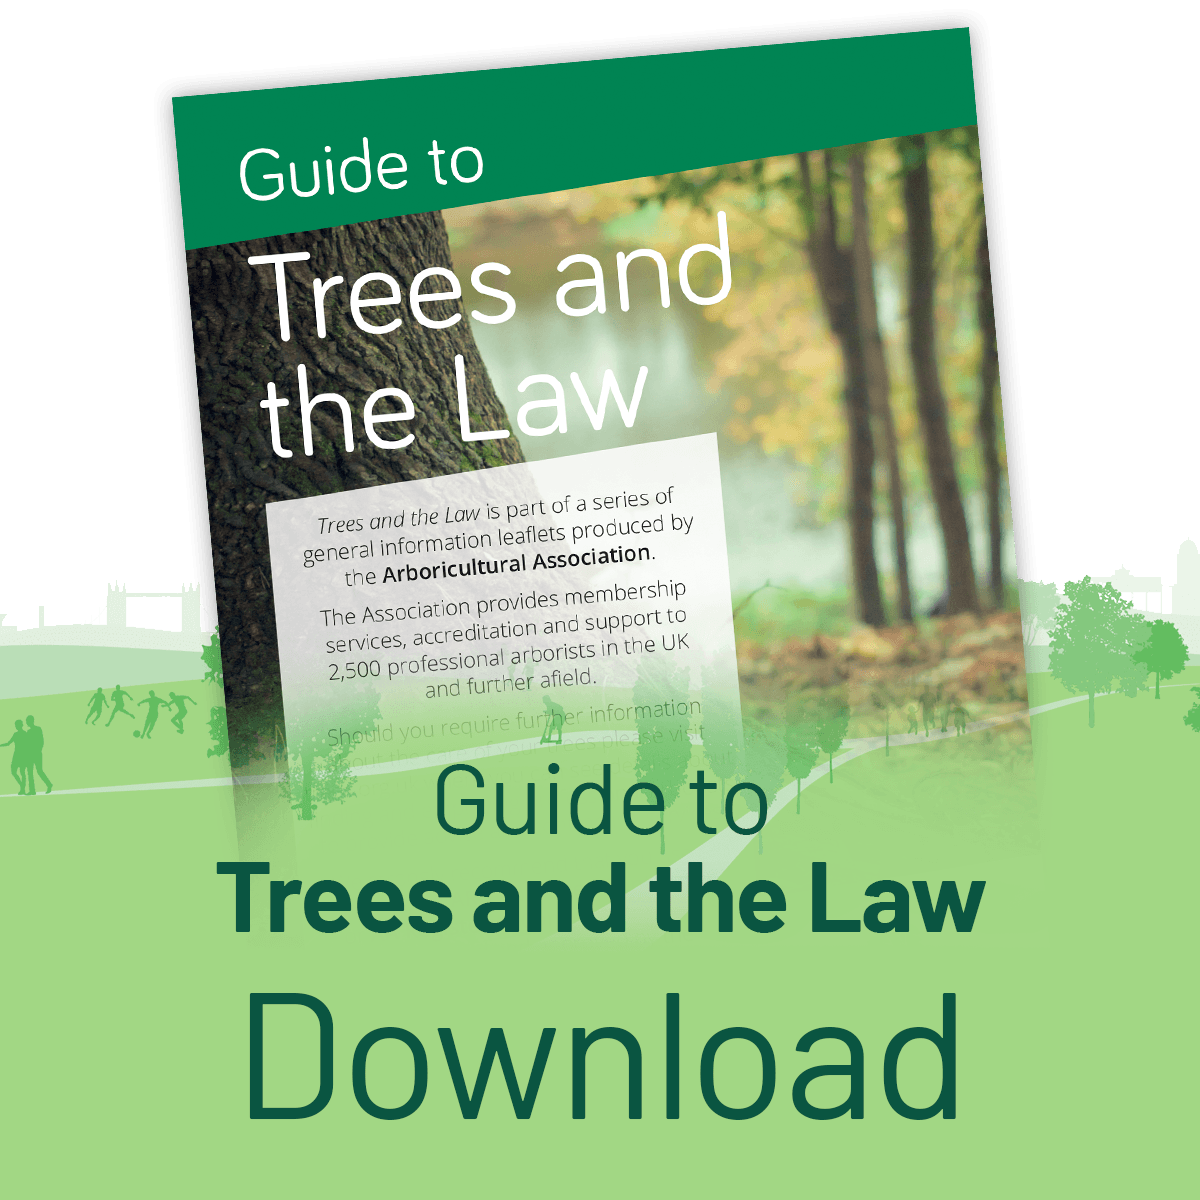 Download the Guide to Trees and the Law Leaflet